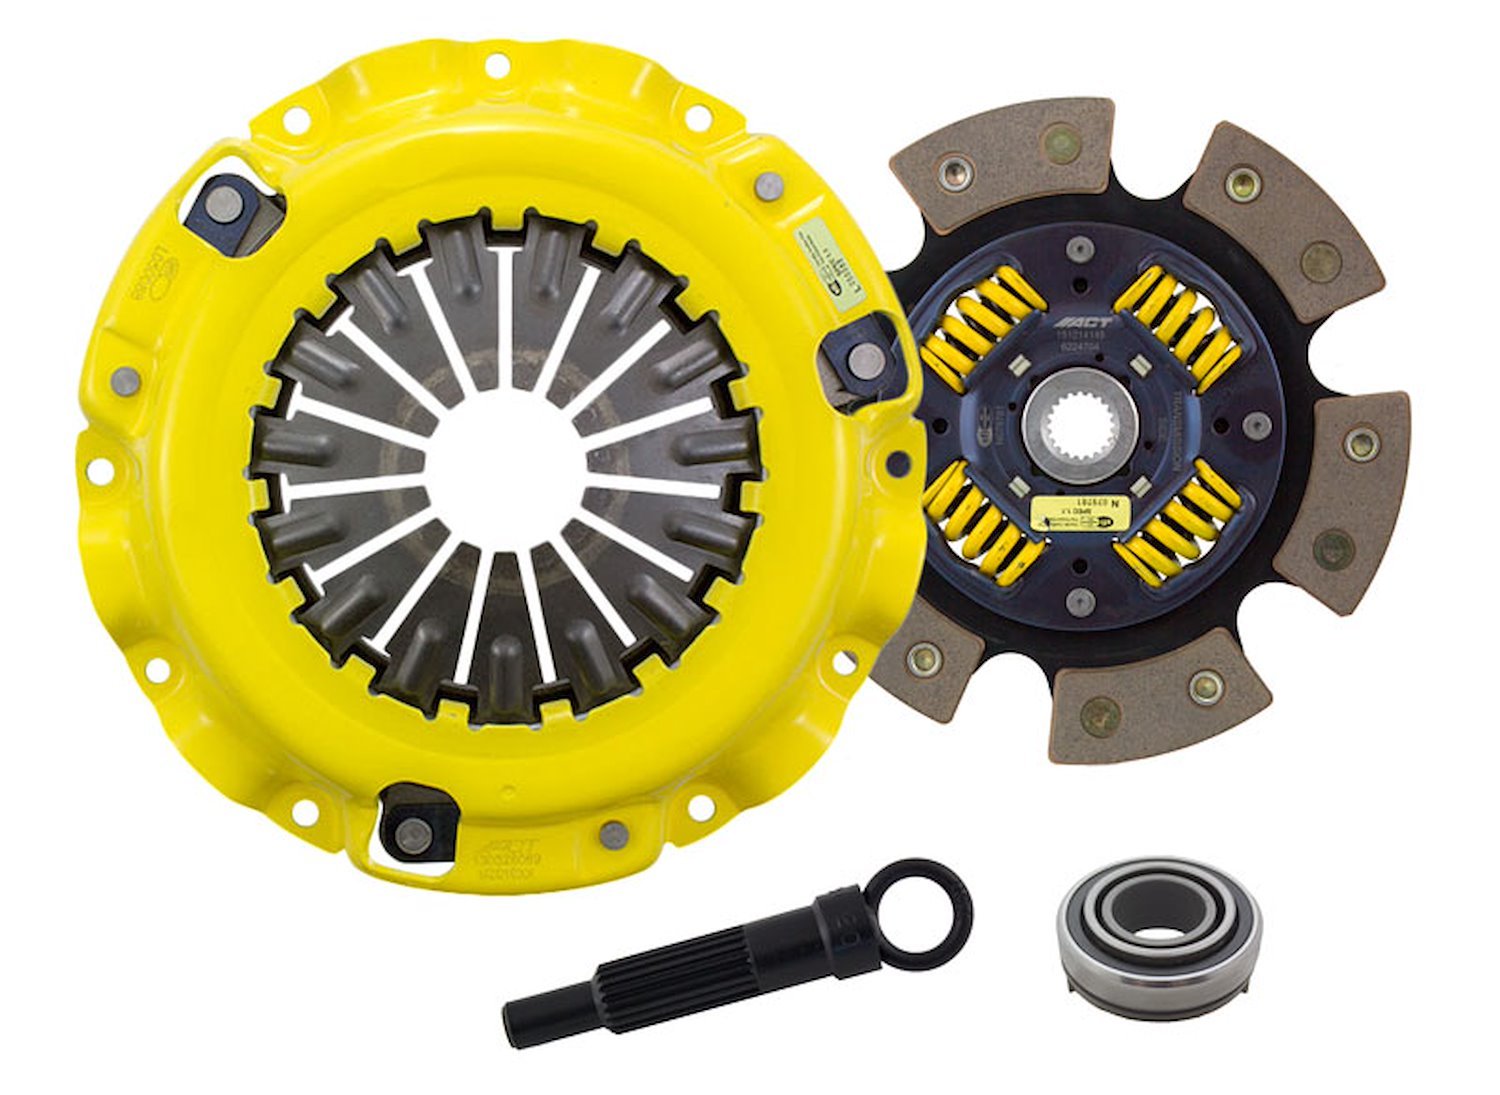 MaXX/Race Sprung 6-Pad Transmission Clutch Kit Fits Select Chrysler/Dodge/Eagle/Mitsubishi/Plymouth